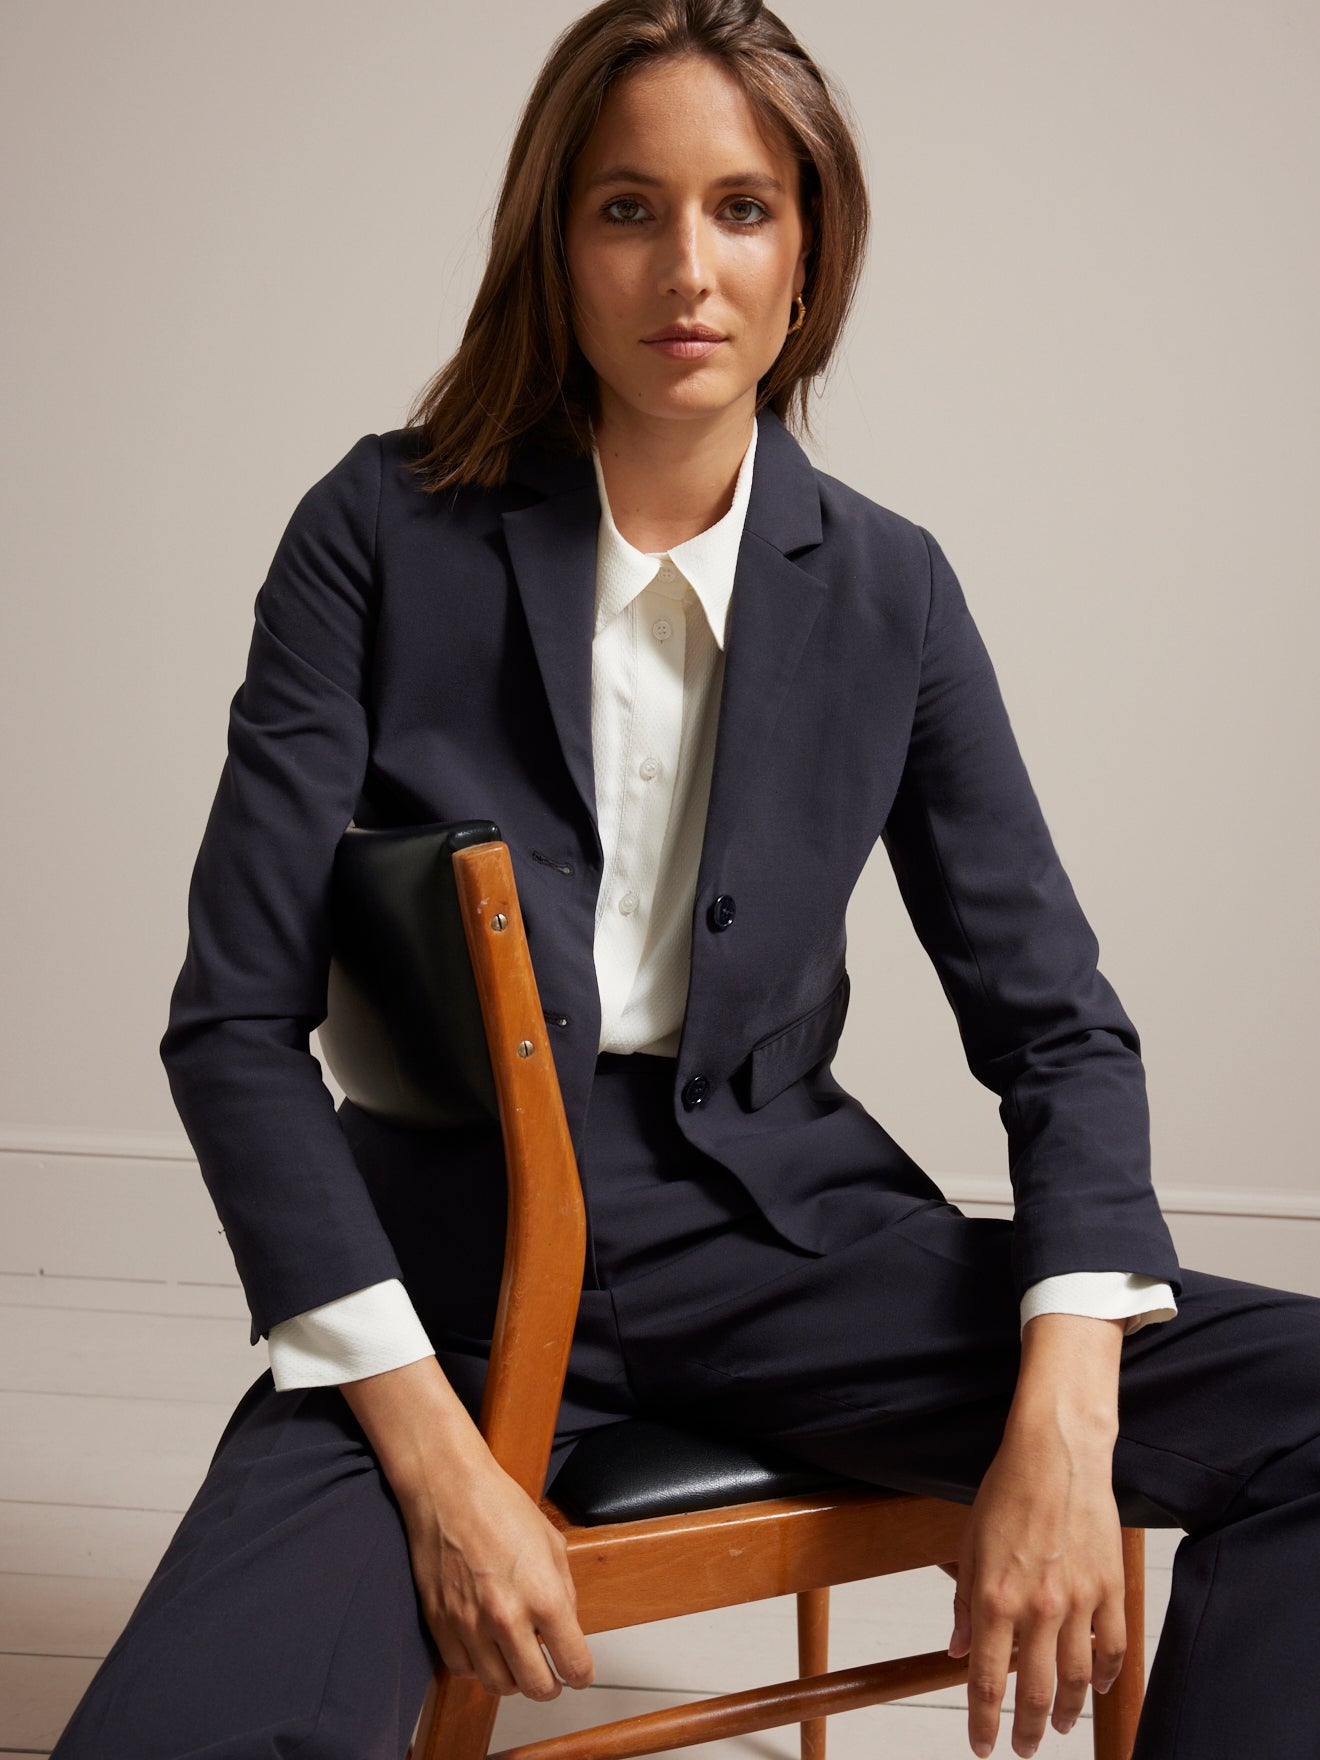 Women's Black Pant Suits gifts - up to −85%